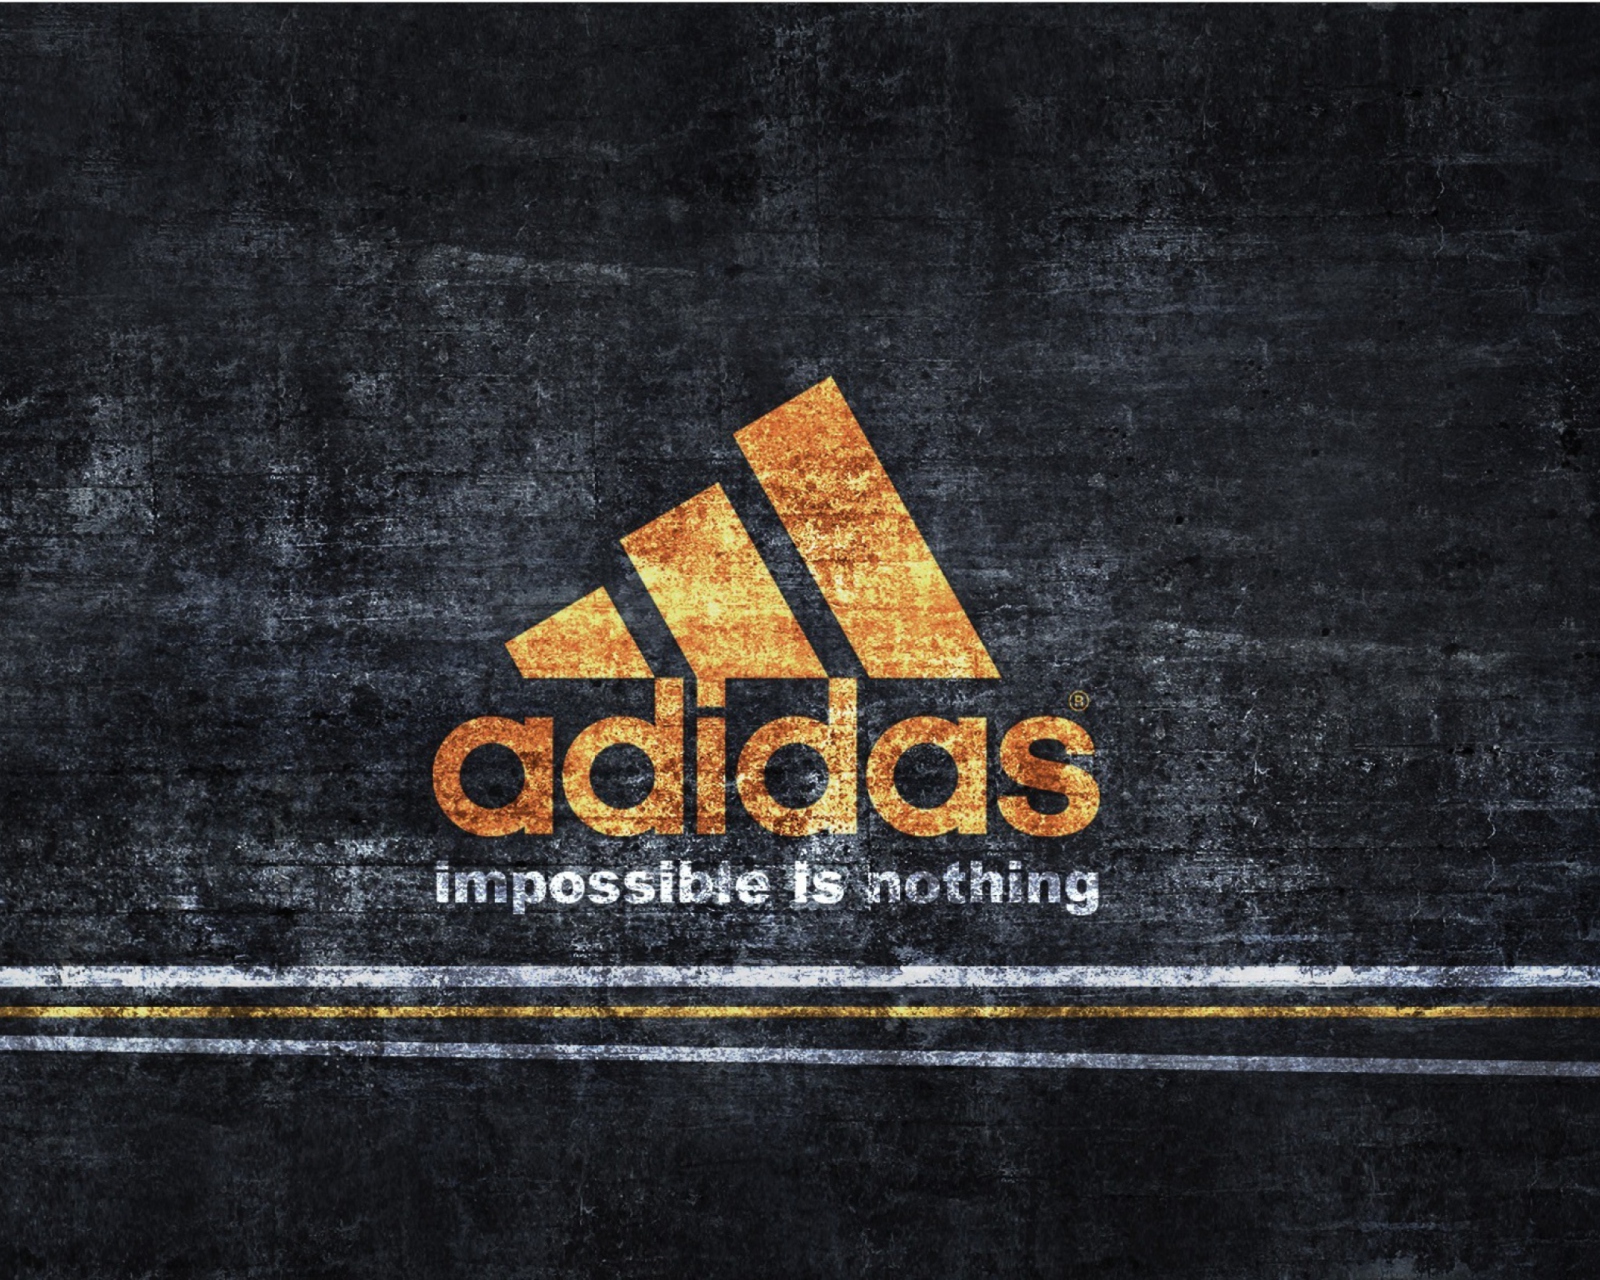 Adidas – Impossible is Nothing screenshot #1 1600x1280